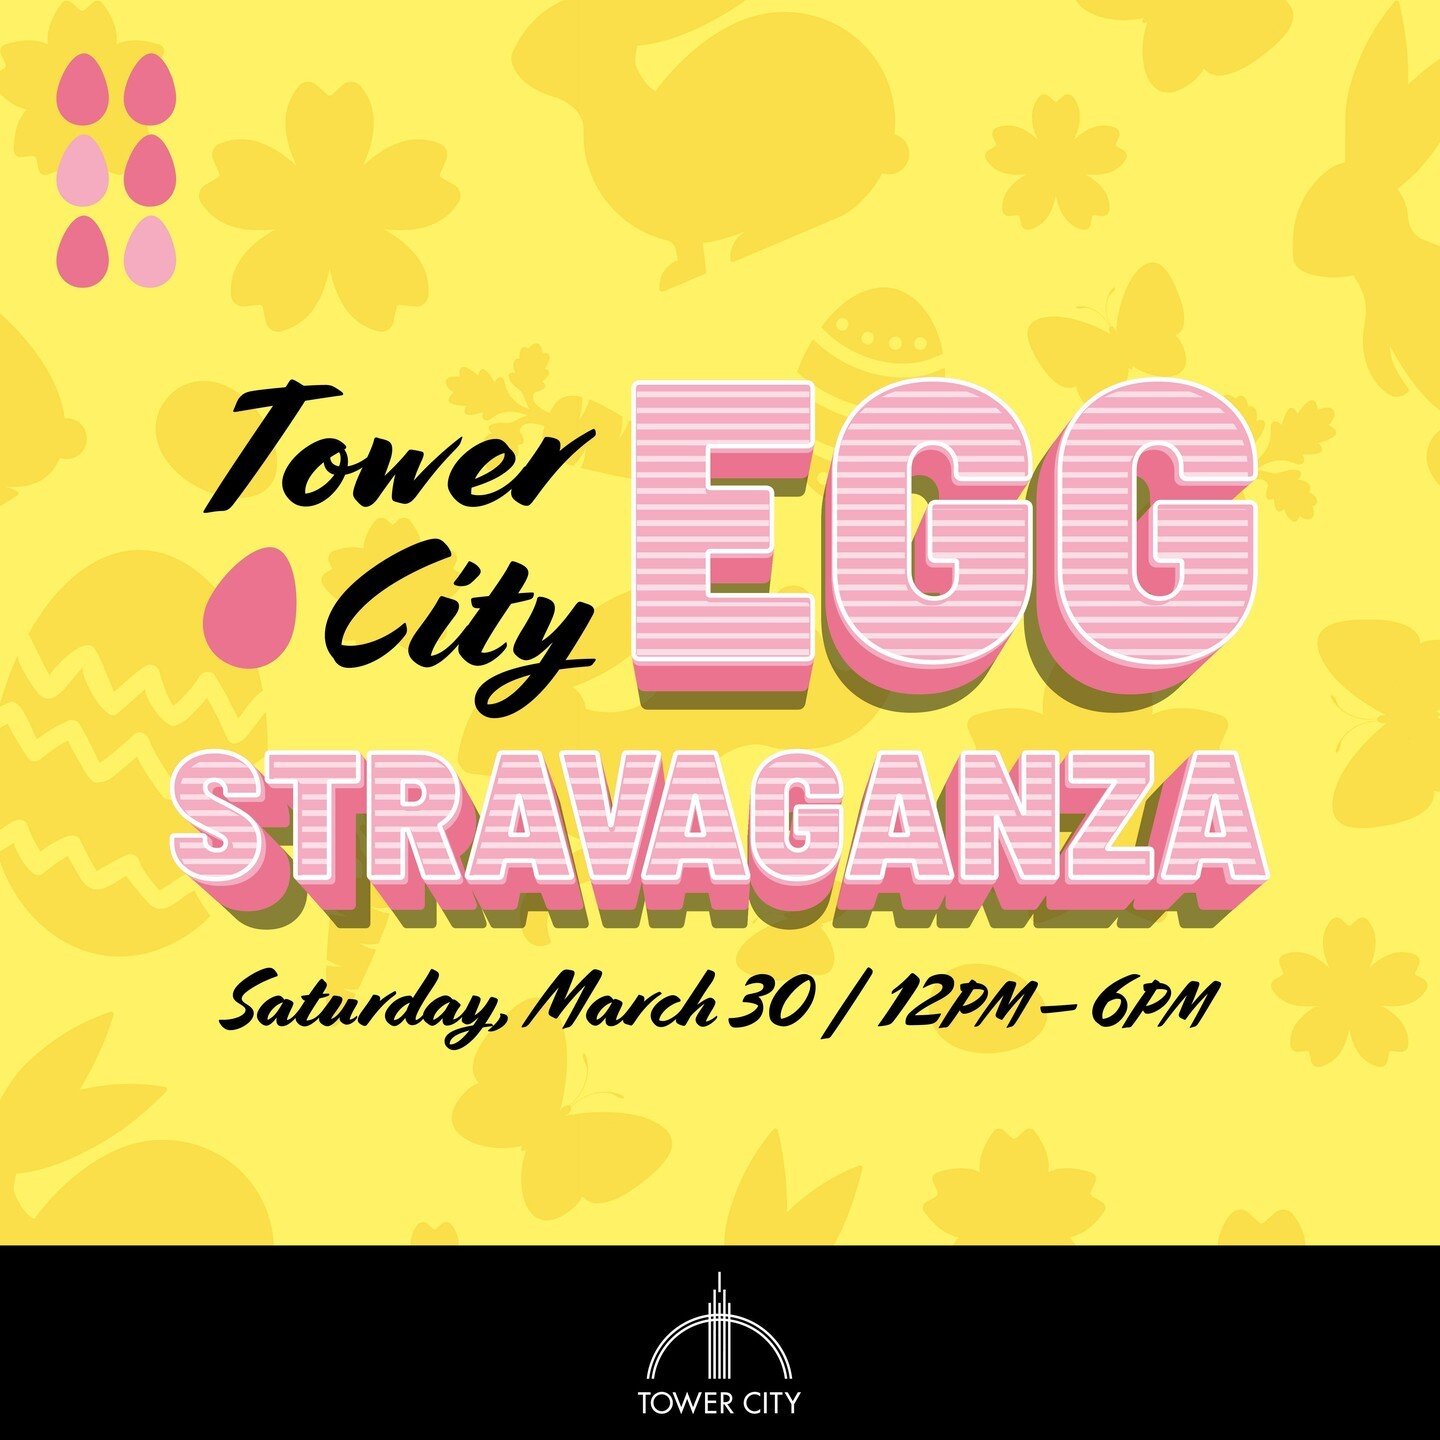 Get ready to spring into fun at this FREE event! Your family is in for an EGGstraordinary time at the Eggstravaganza this Saturday! 🌸🐰 🎉

Here's what's hopping at the event:
🐇 Bunny Petting Zoo operated by our pals at Zoo 2 Go
🥕 Retailer Bunny T